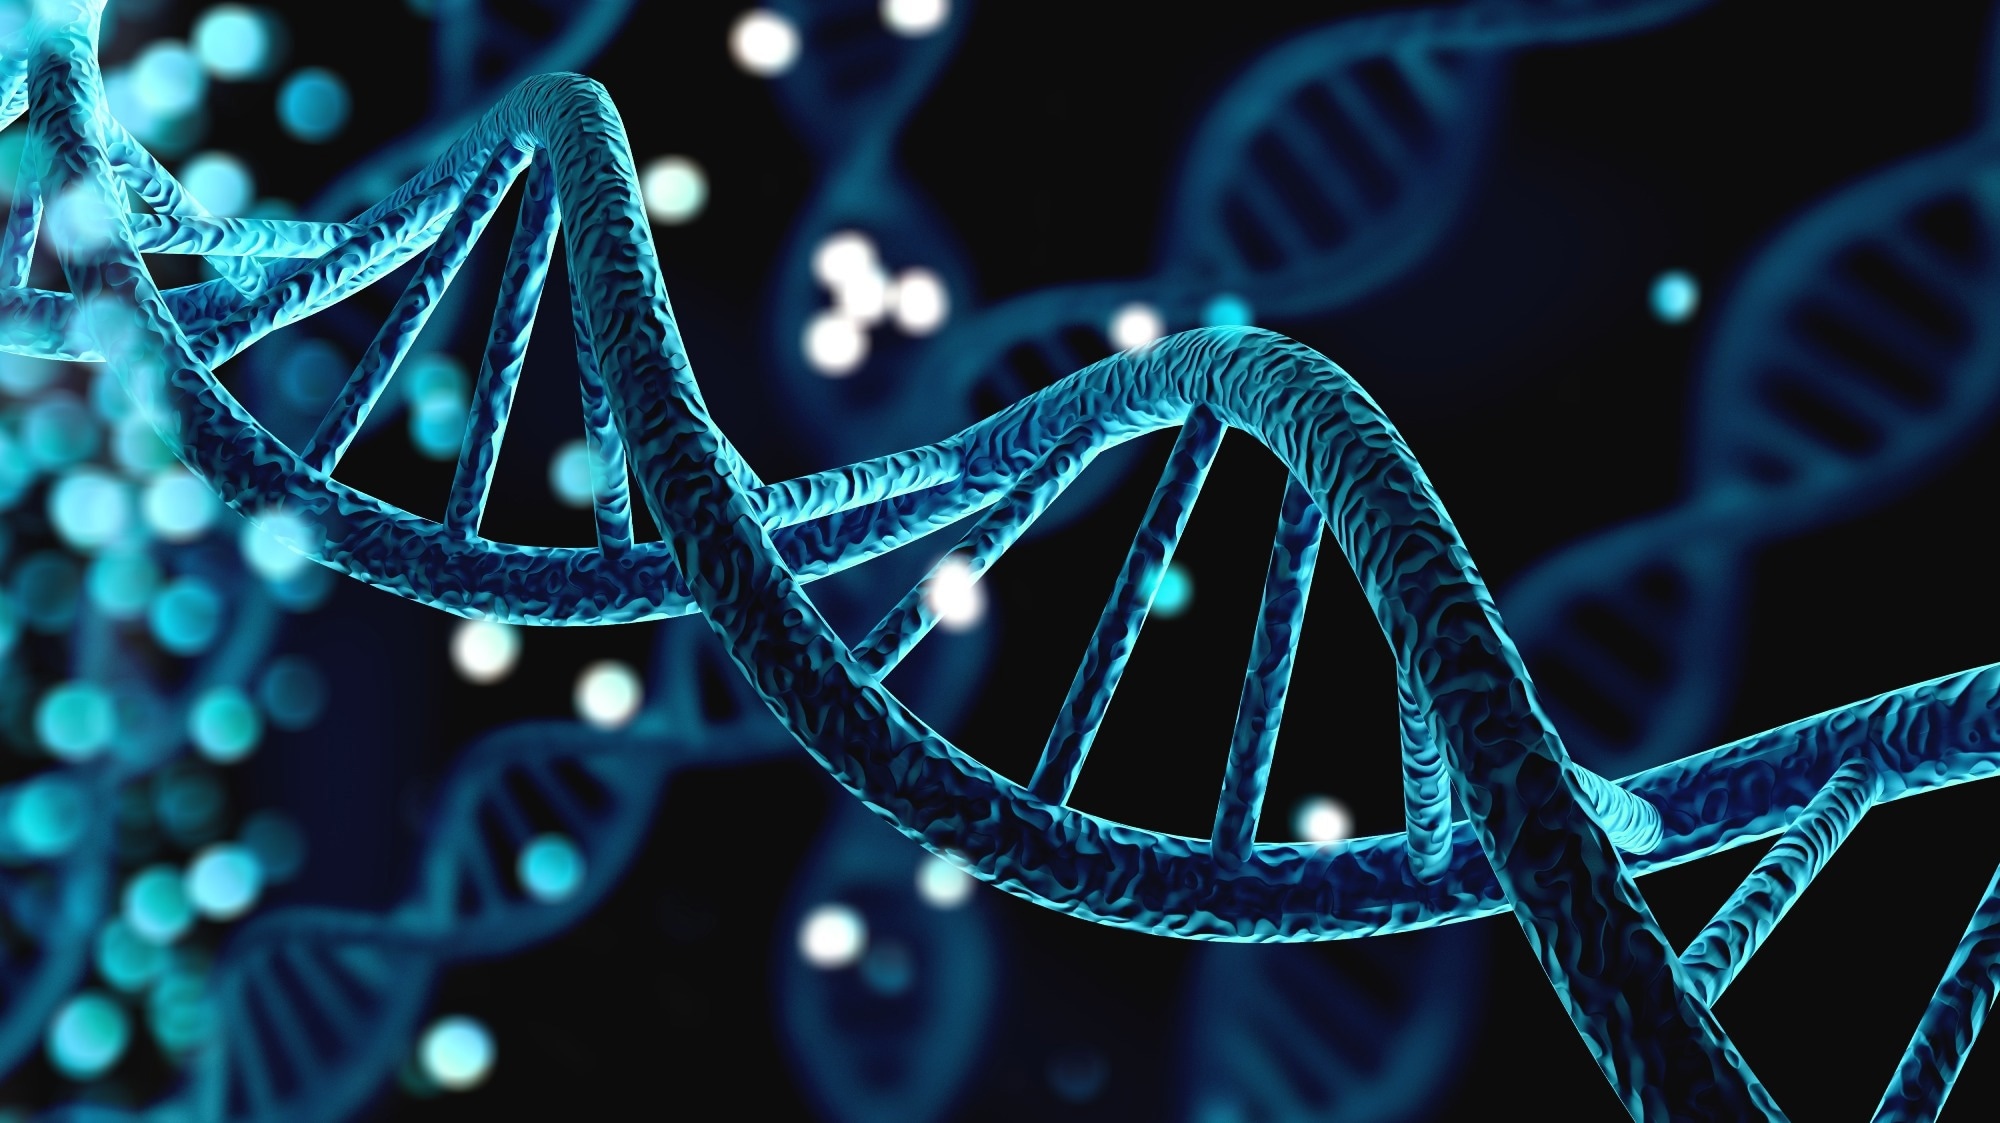 Study: Formation of memory assemblies through the DNA-sensing TLR9 pathway. Image Credit: Billion Photos / Shutterstock